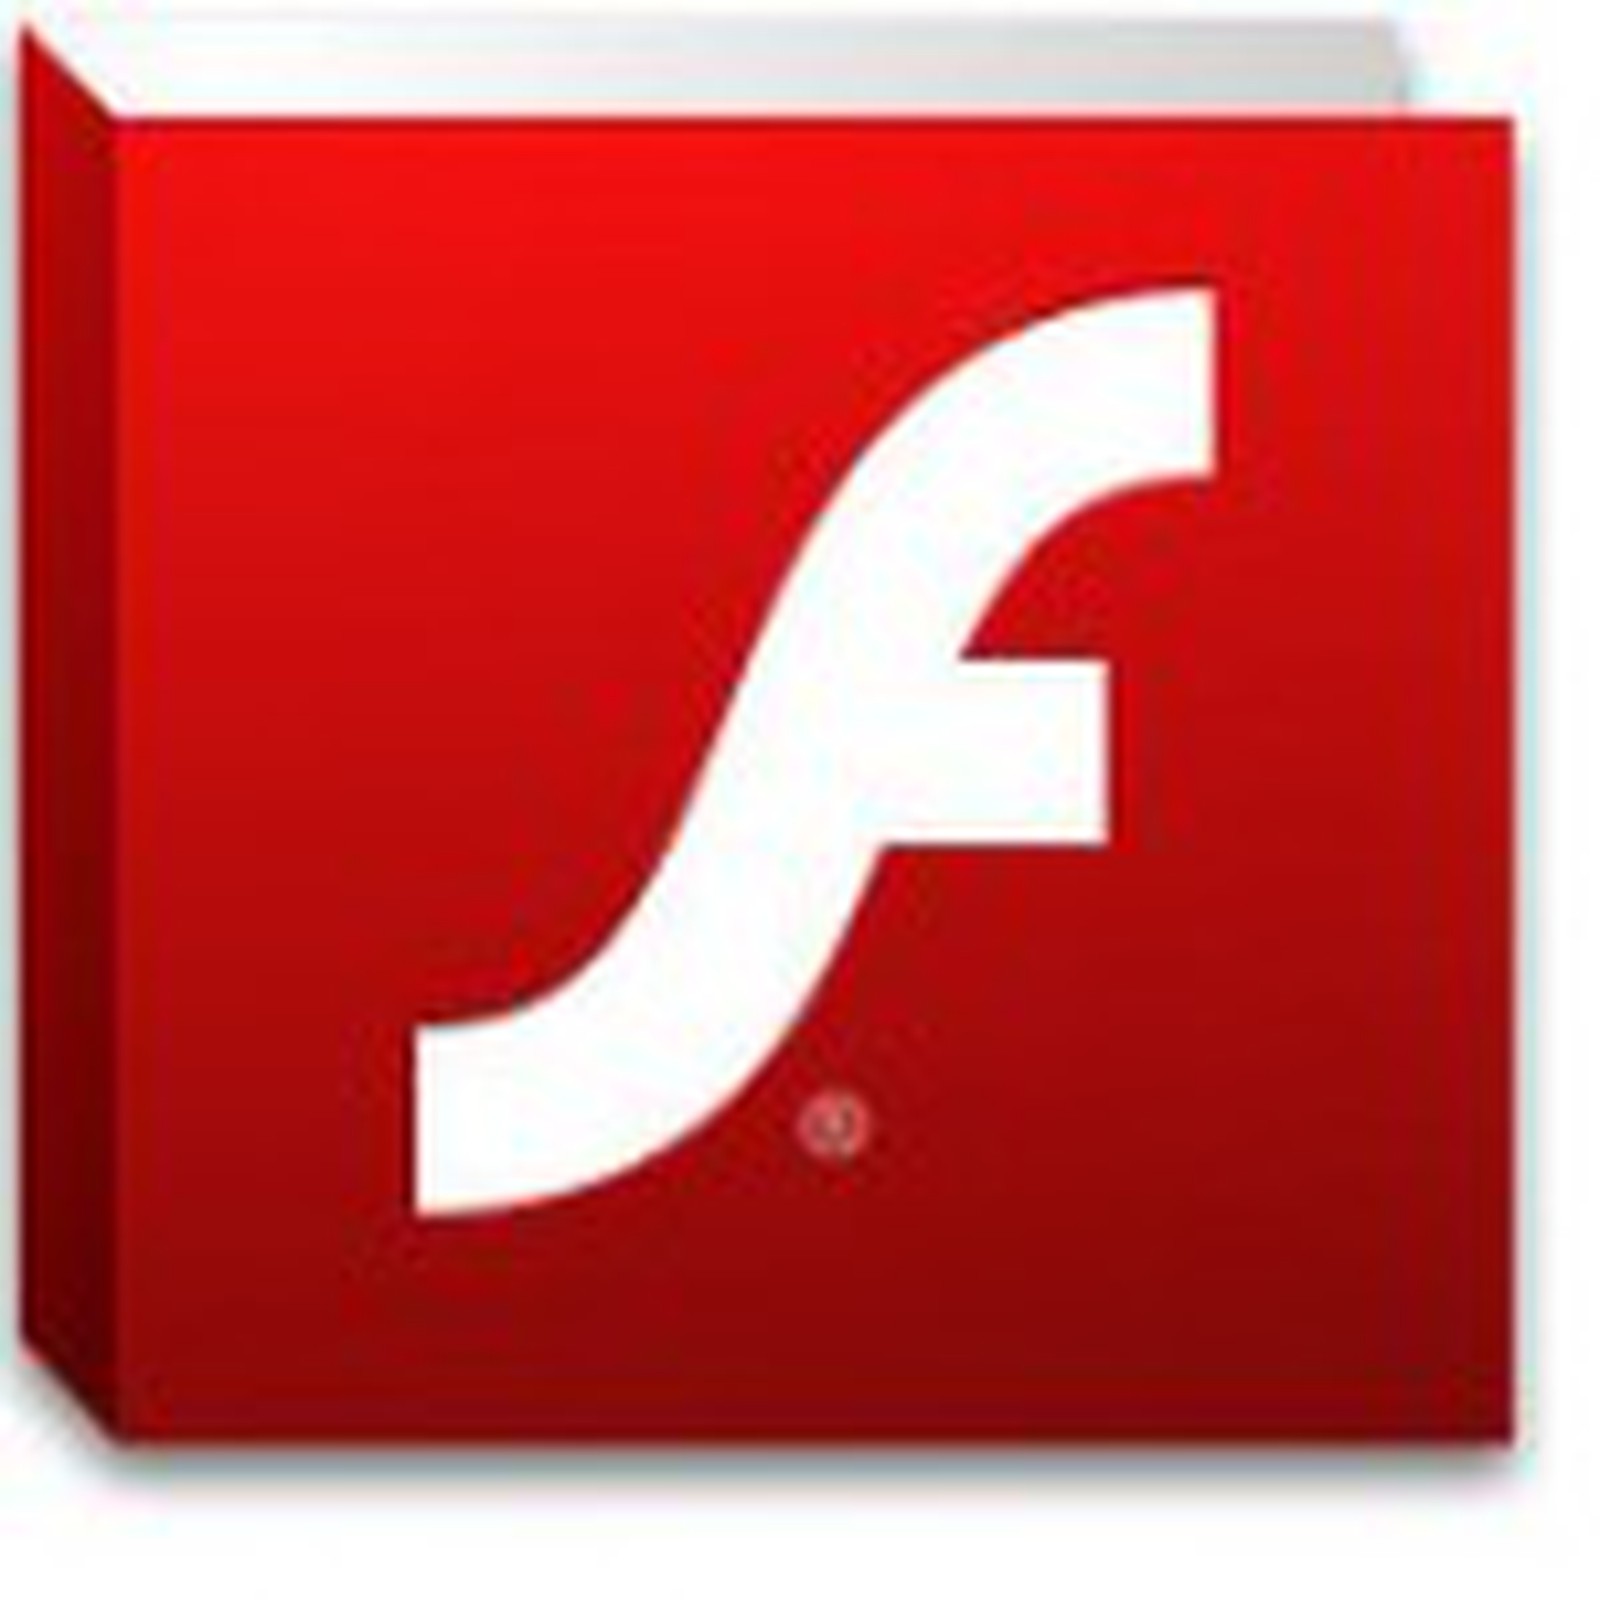 how to get flash player on macbook air